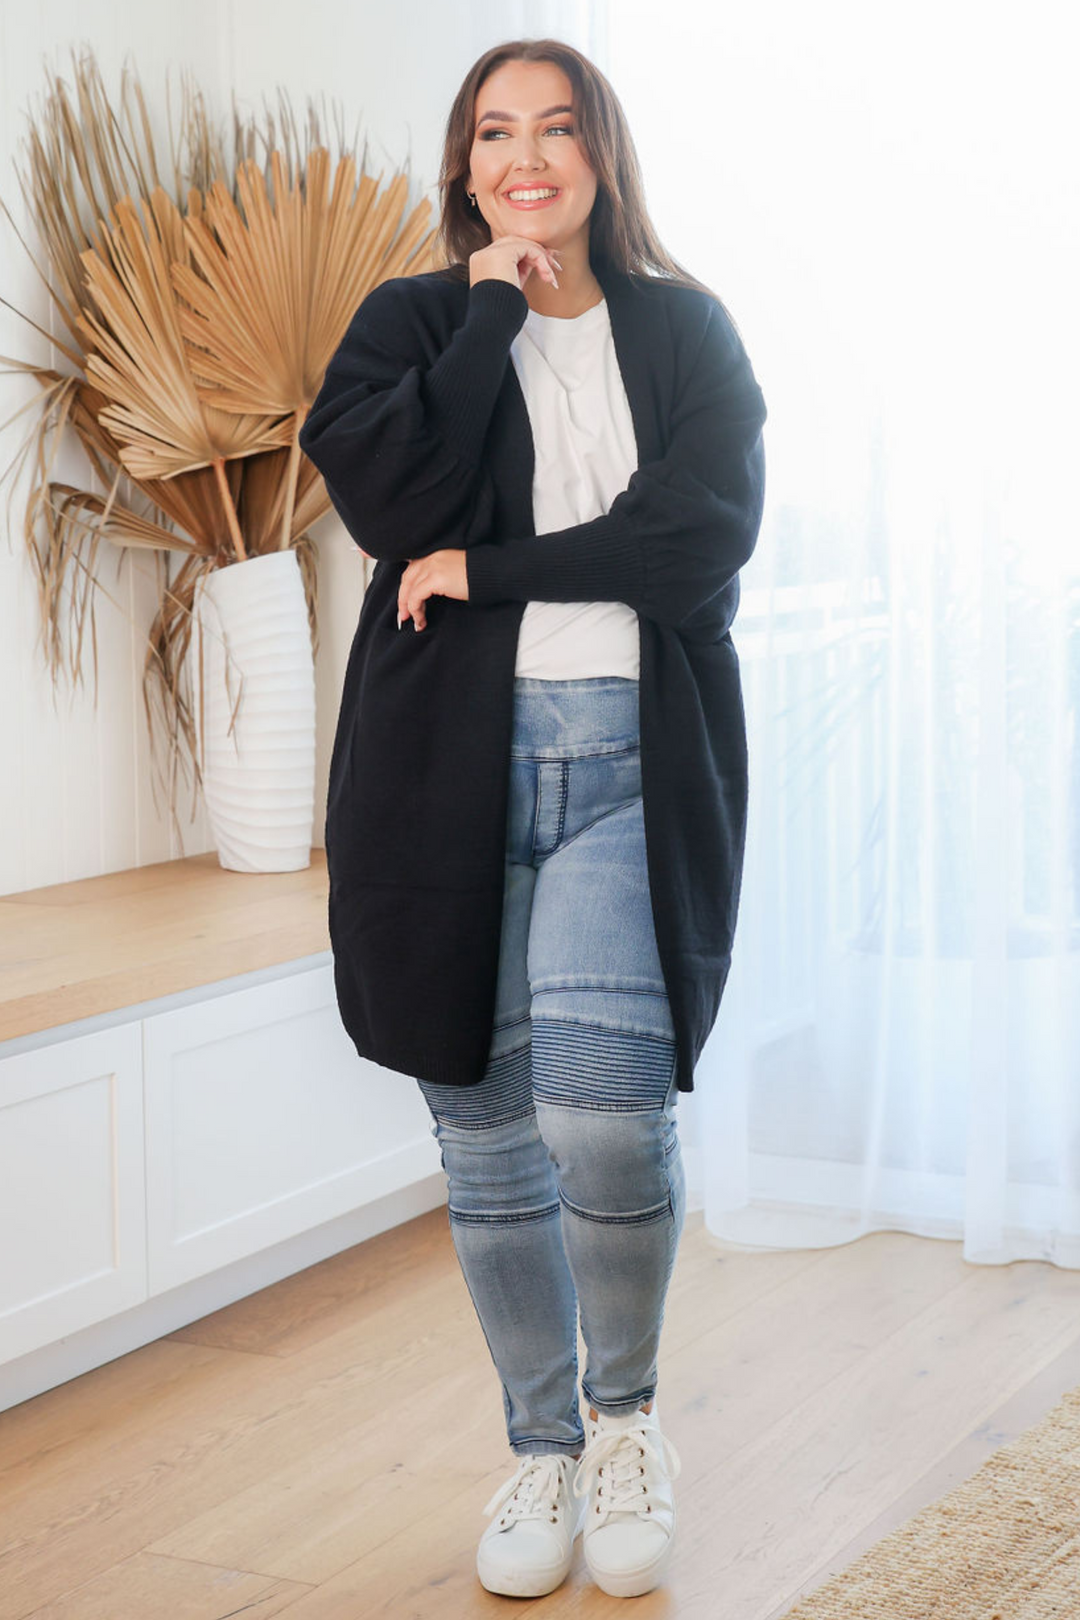 Ladies Cardigan - Black - Longline Cardigan - Funtional Front Pockets - Front Functional Pockets - Long Balloon Sleeve - Maya Cardigan Black Size S/M Paired with Delilah Denim Jeans Size 14 - Daisy's Closet